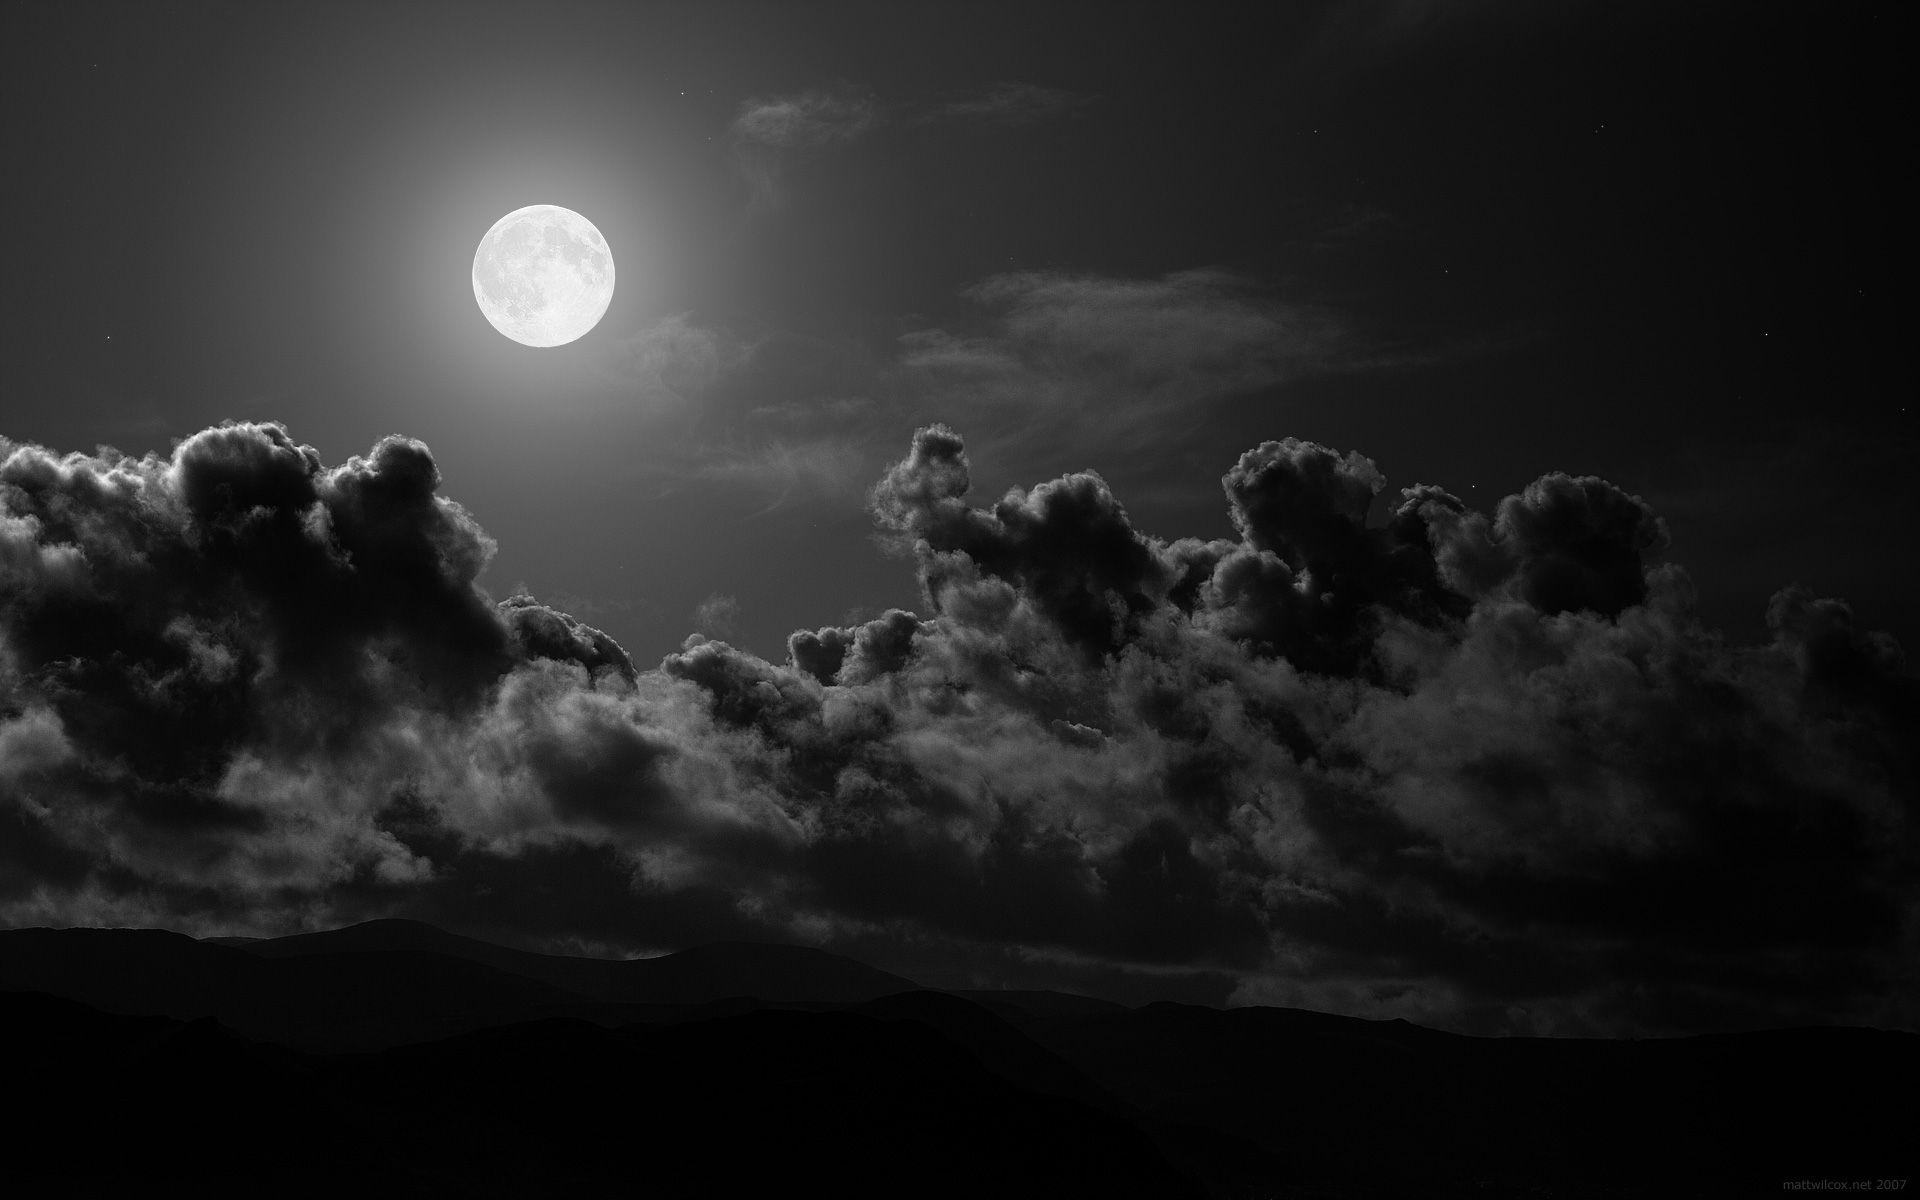 Turn Your Desktop Black And White With These Wallpaper. Lifehacker